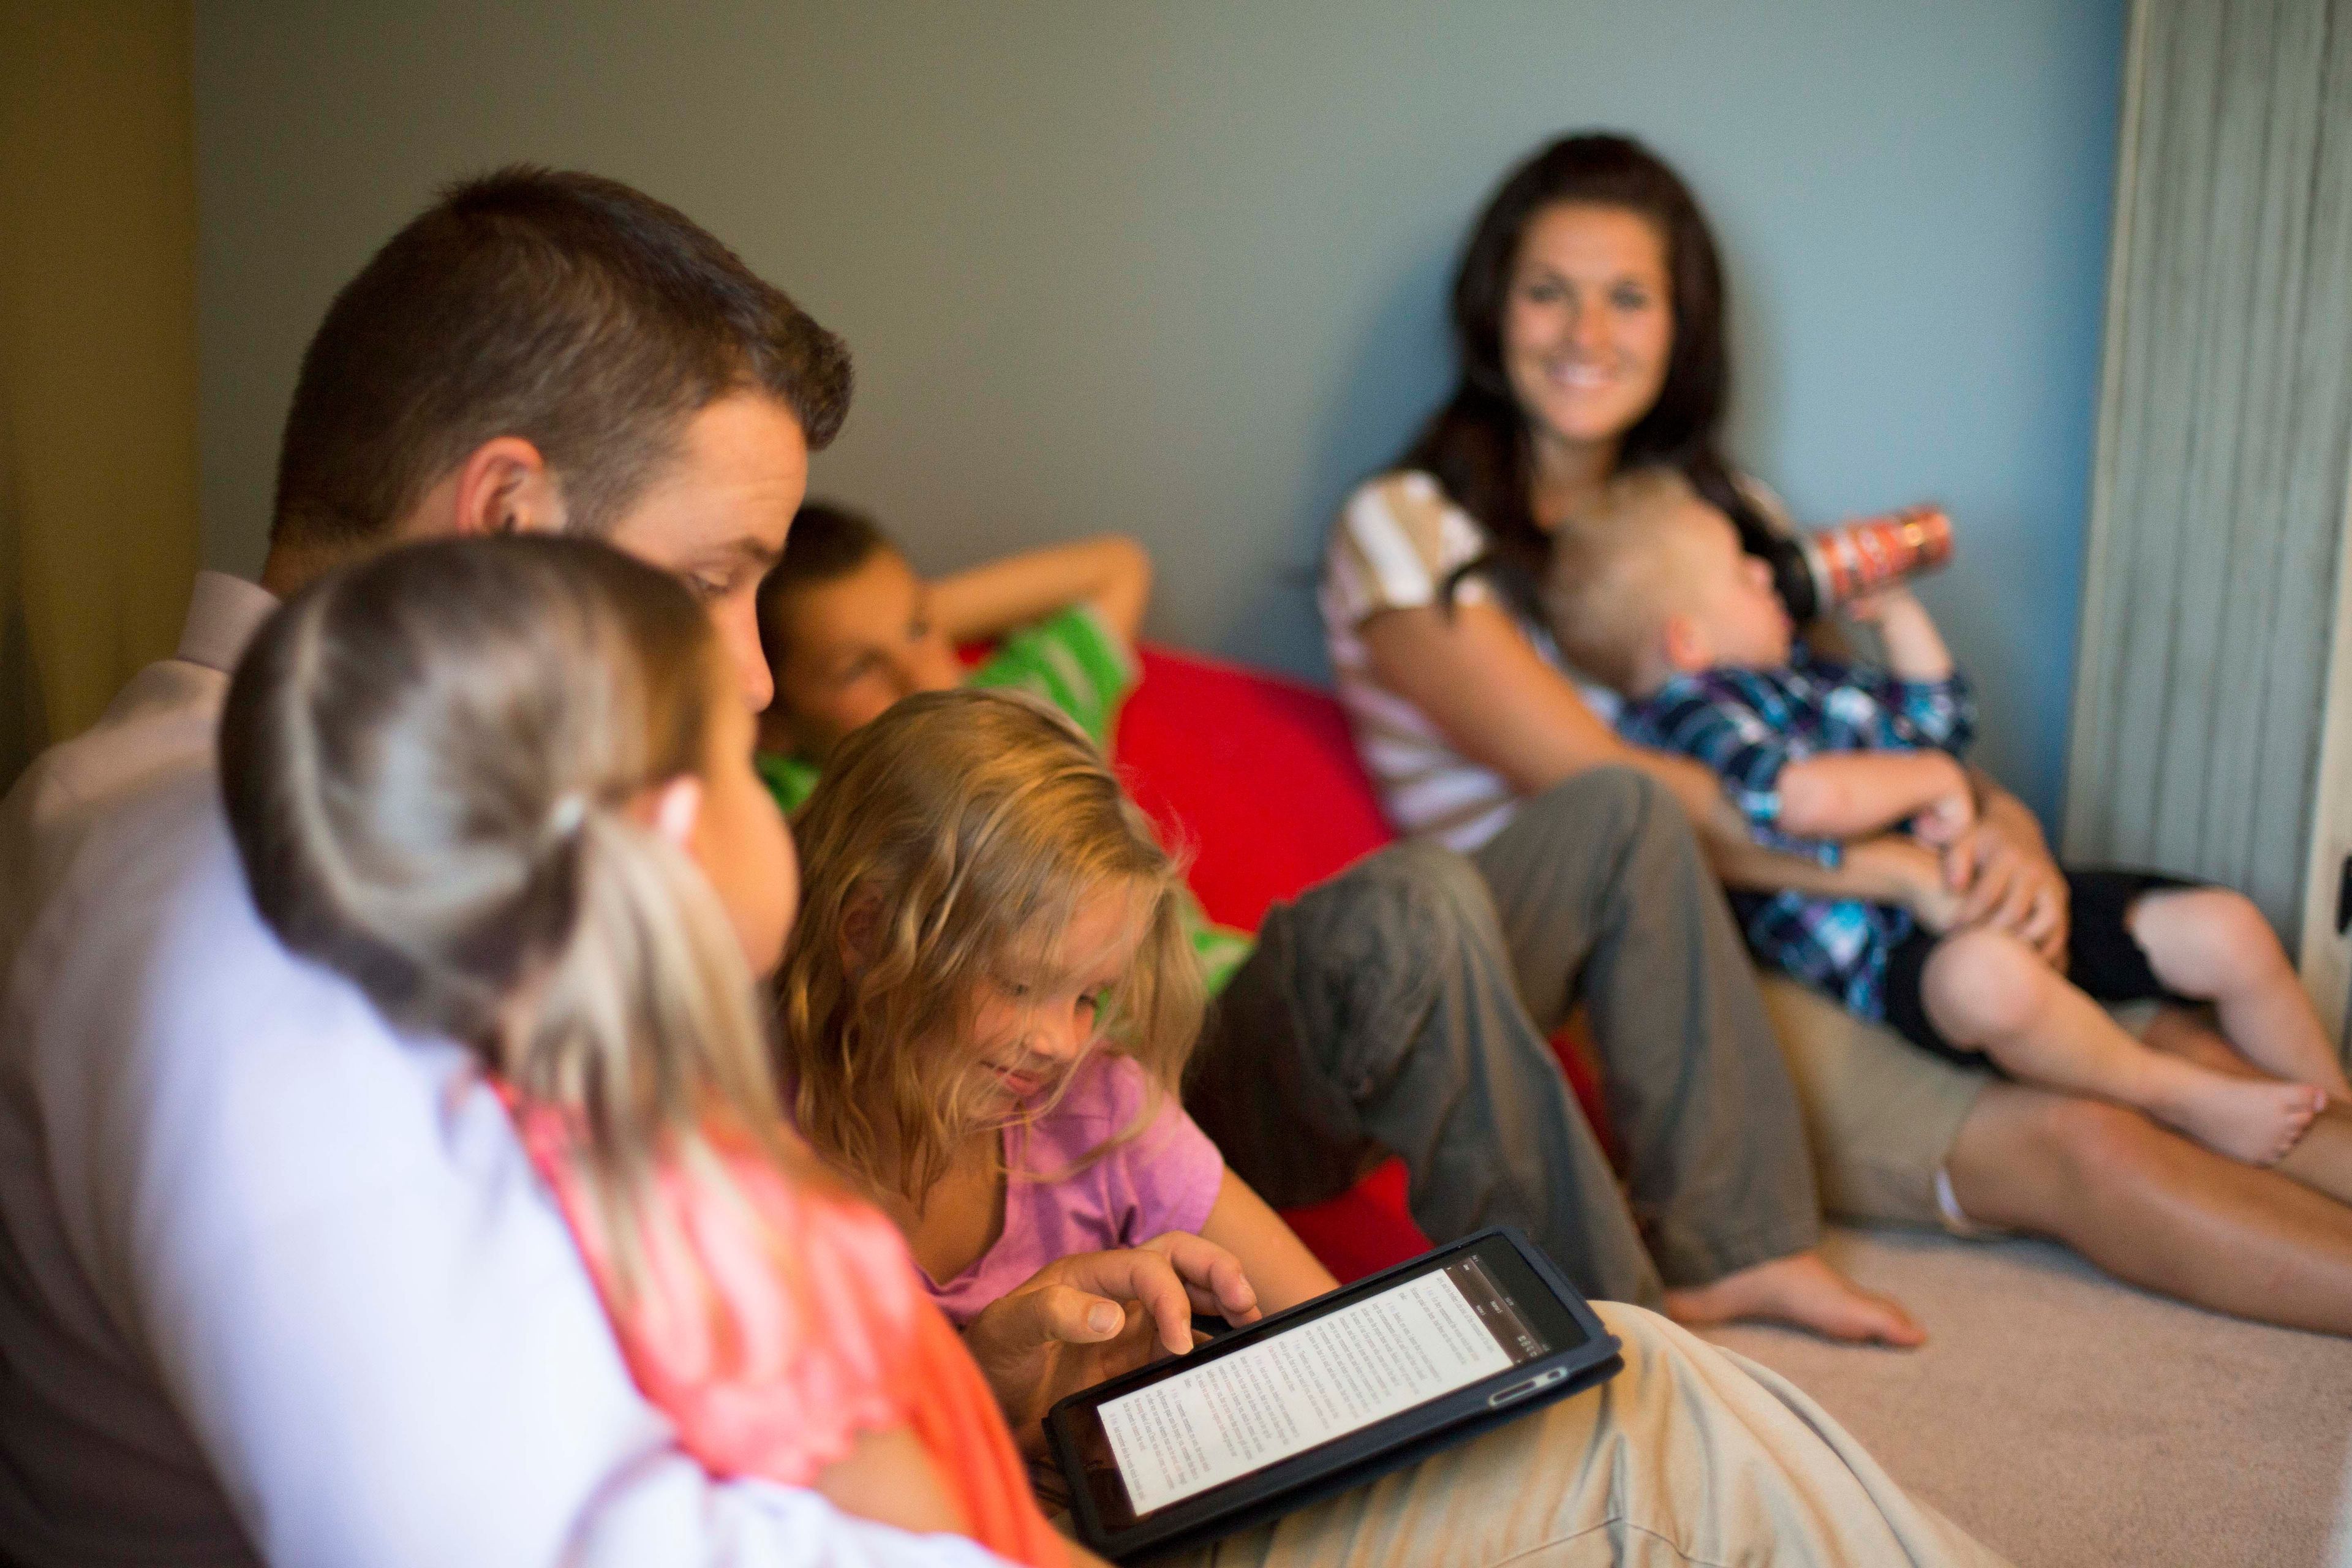 A family sitting down together while the father reads from a tablet.  